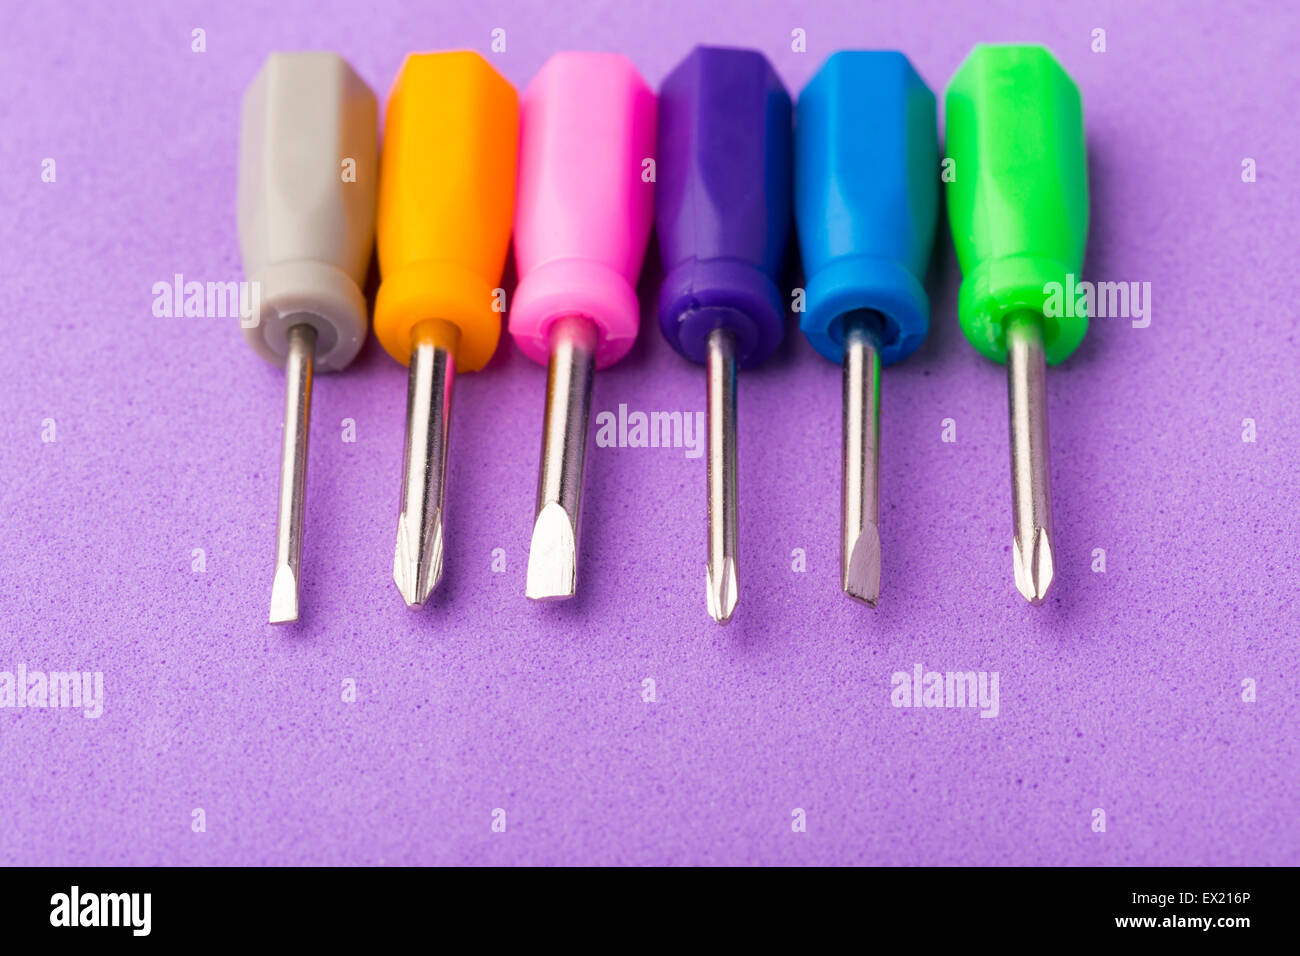 New colored screwdriver set on purple background Stock Photo